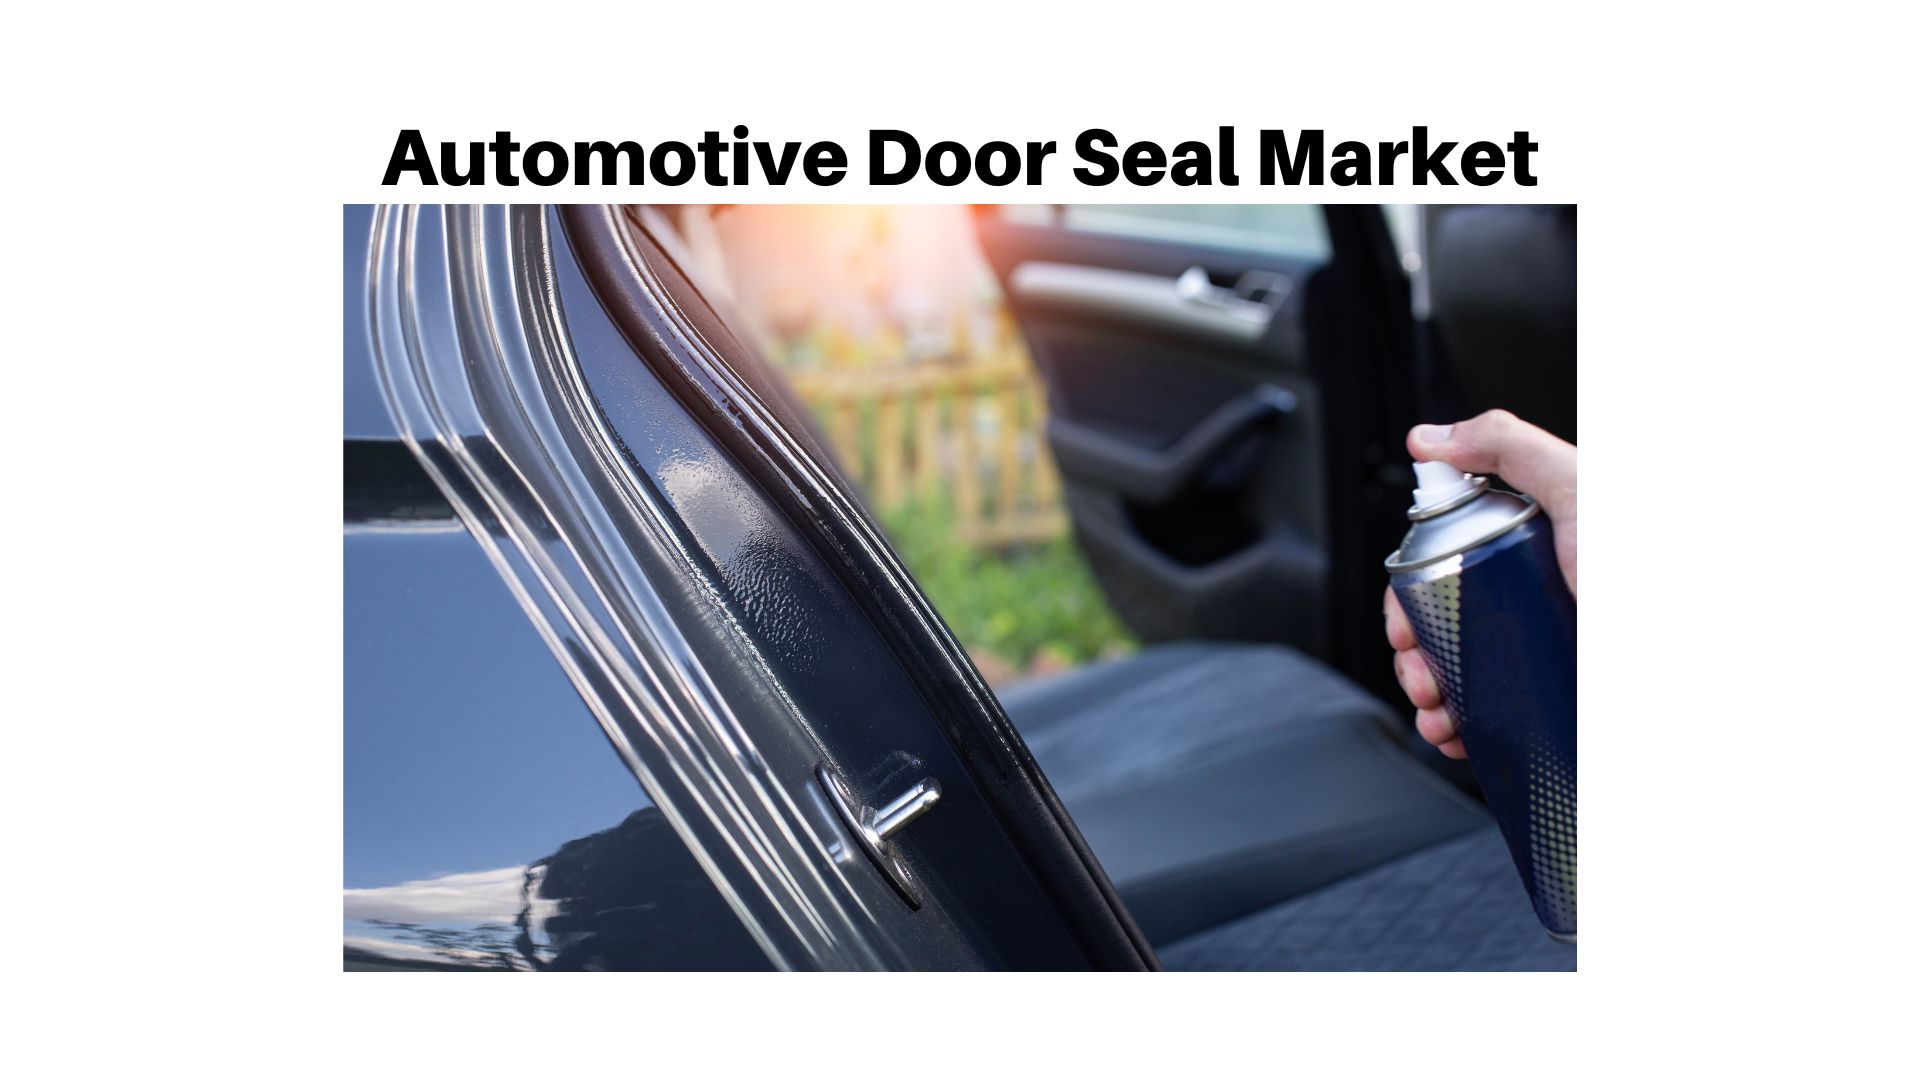 Automotive Door Seal Market Size Expected To Reach USD 33.41 Billion By 2033